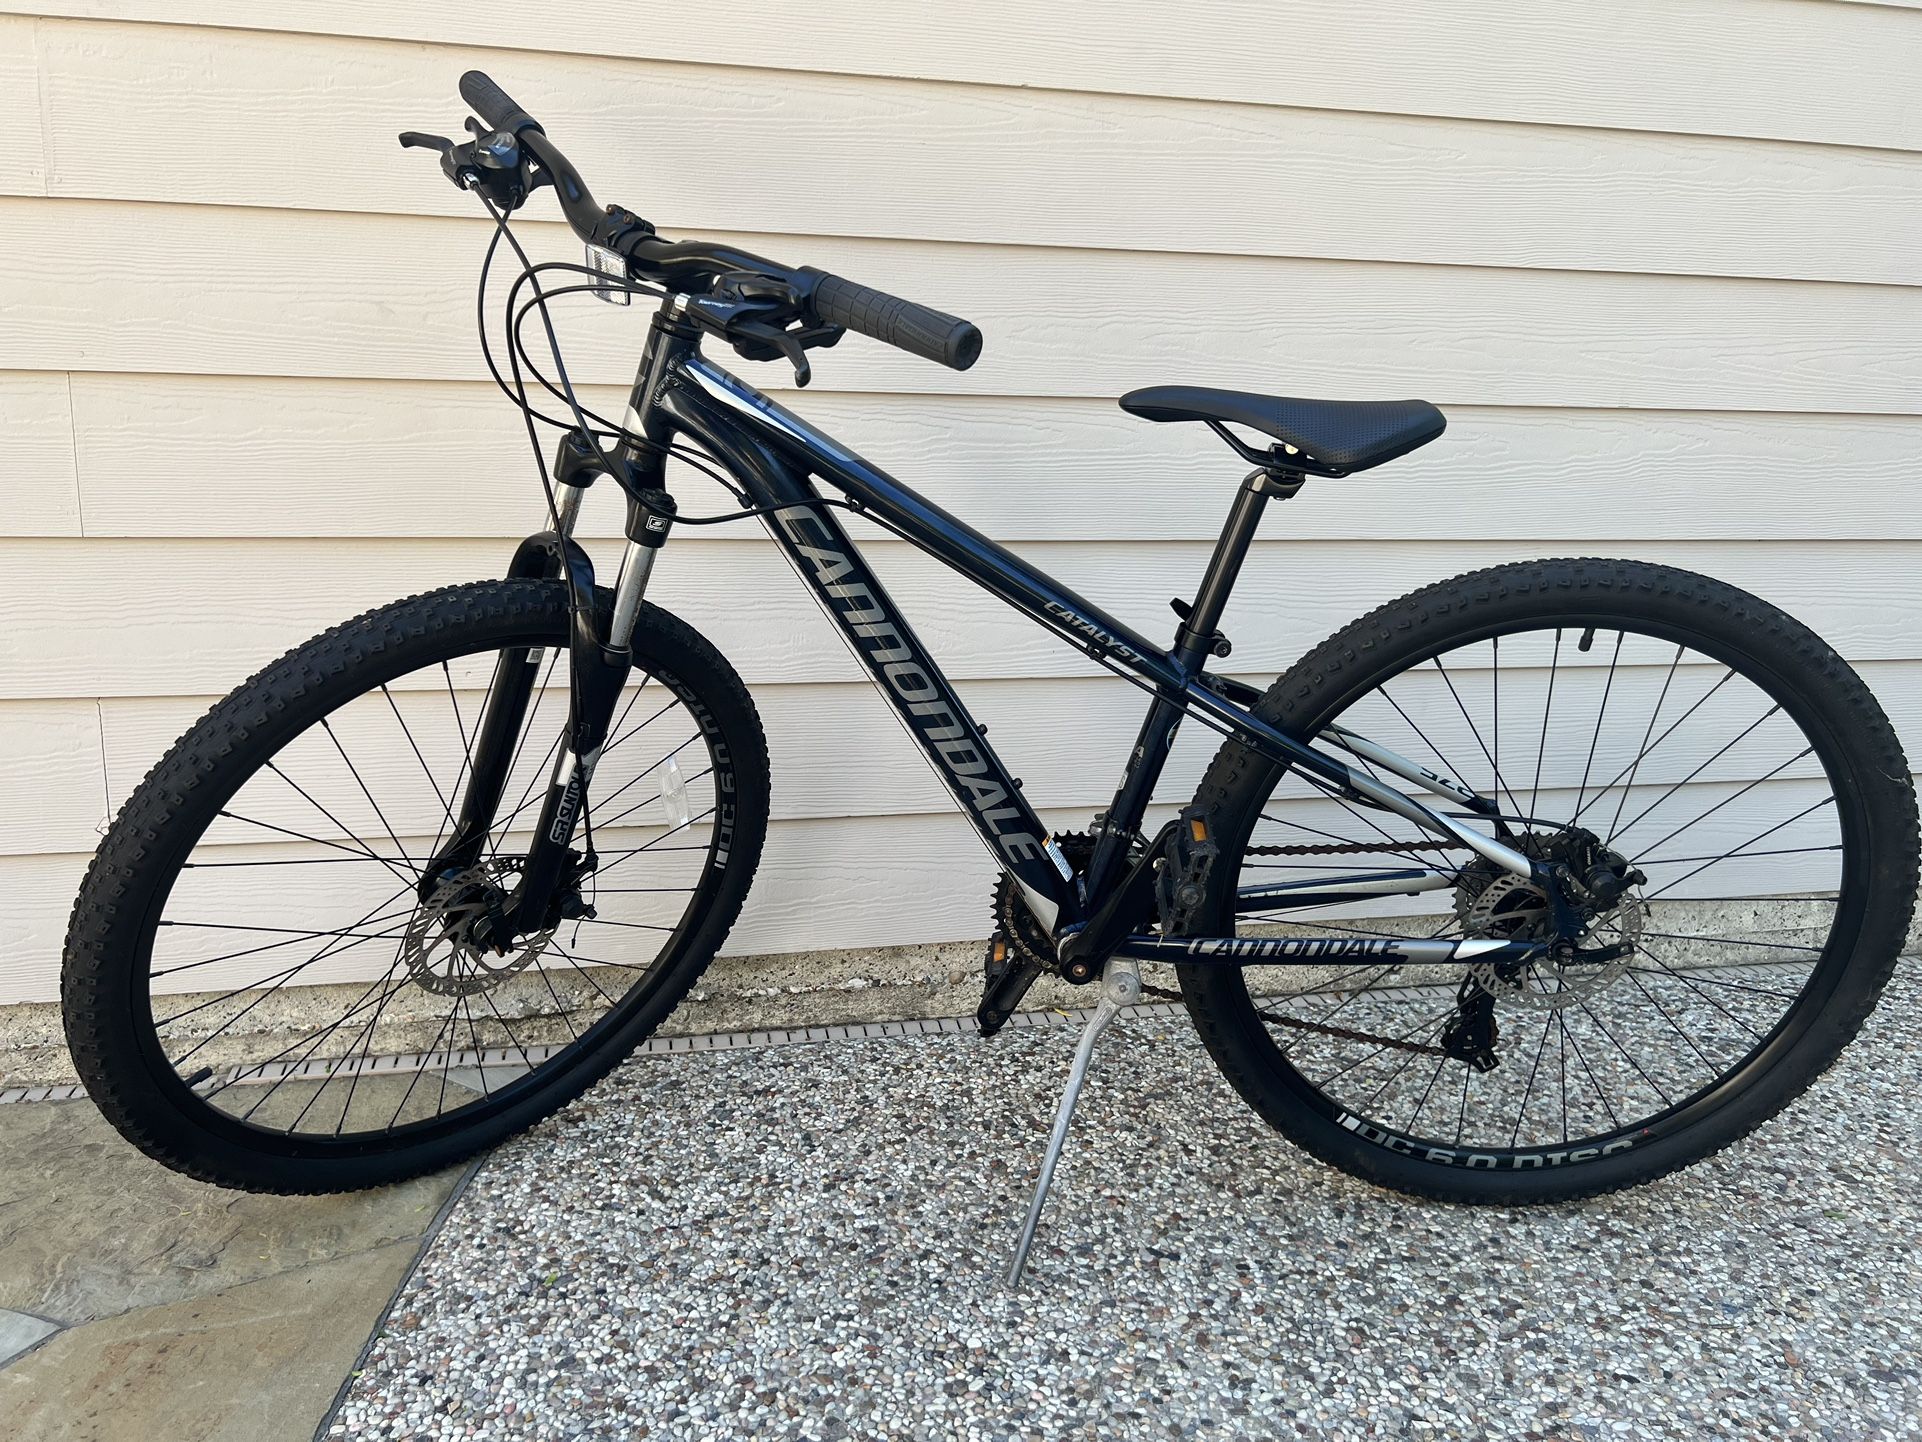 Cannondale Catalyst XS 27.5 Mountain Bike $300